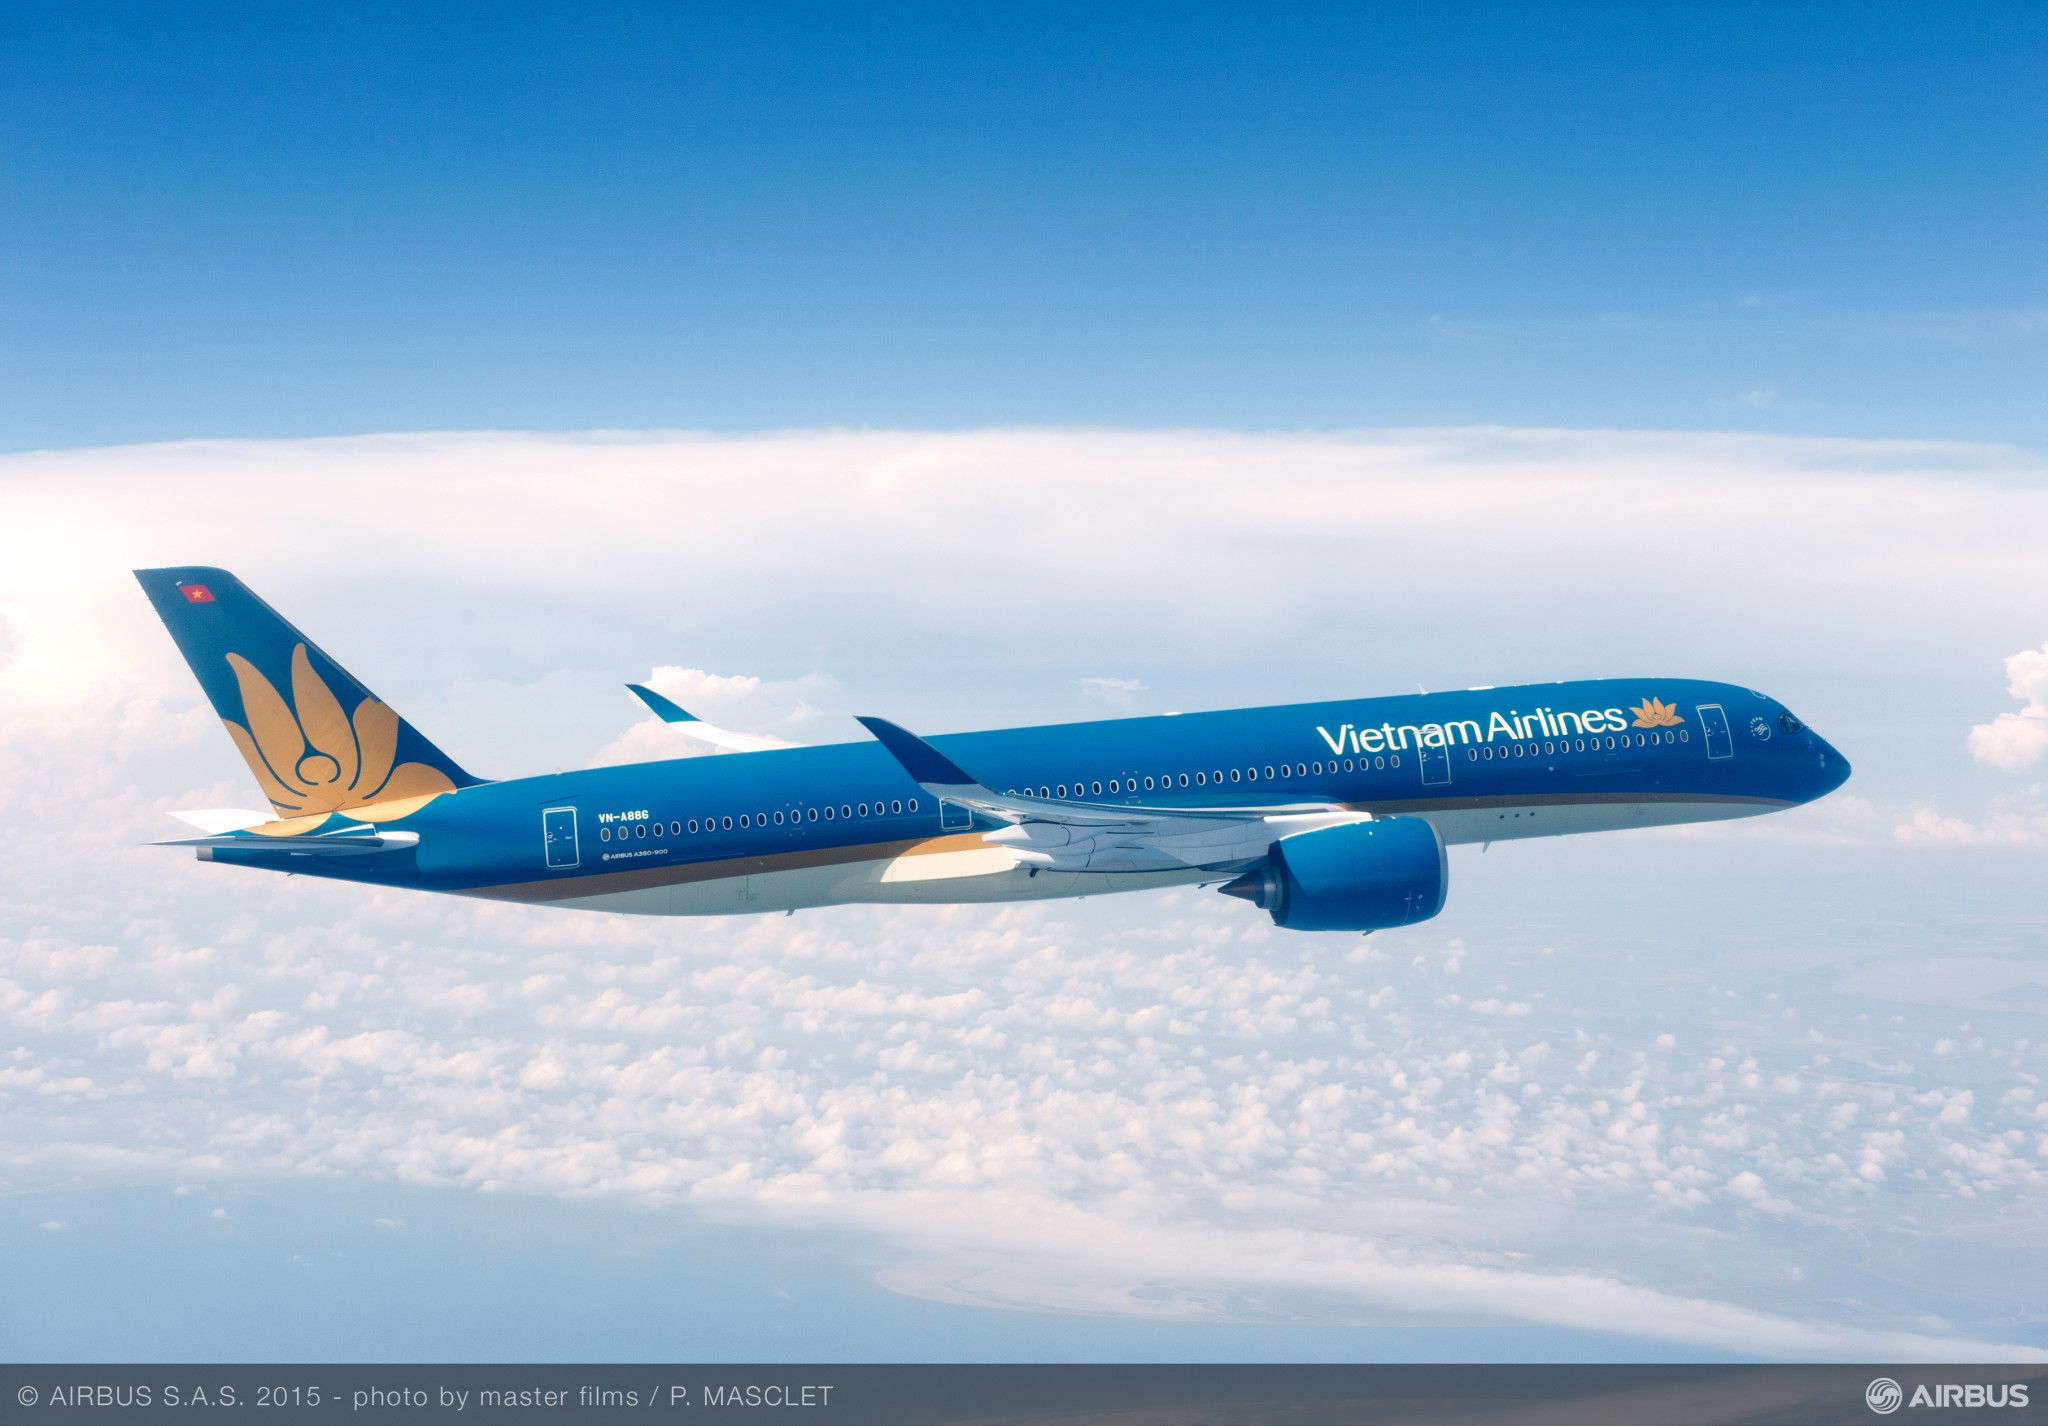 Vietnam Airlines face delisting threat from Ho Chi Minh Stock Exchange if it reports loss